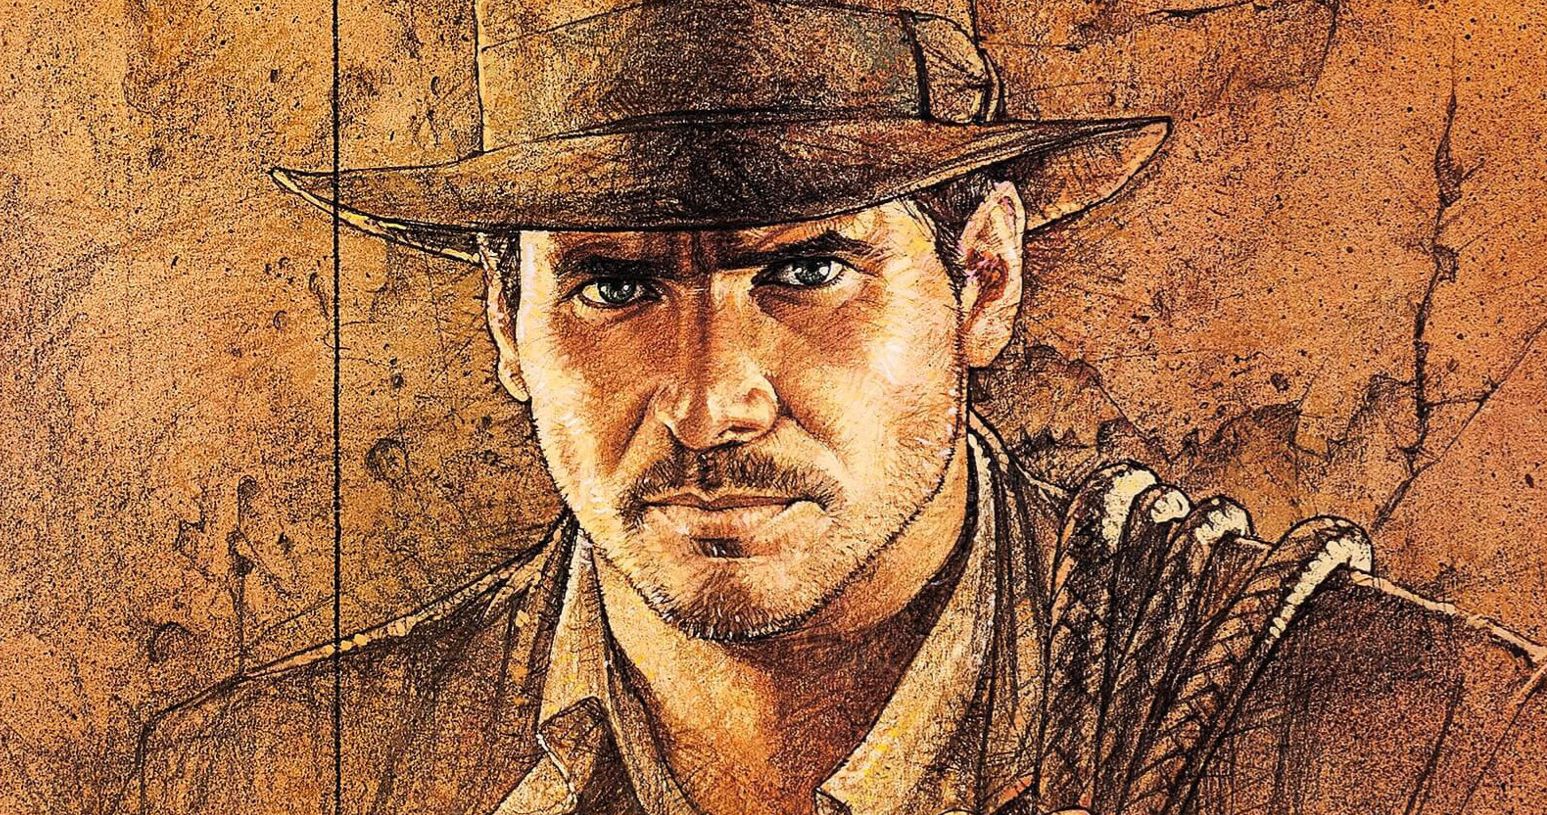 CBS Kicks Off Sunday Night at the Movies with Raiders of the Lost Ark This May